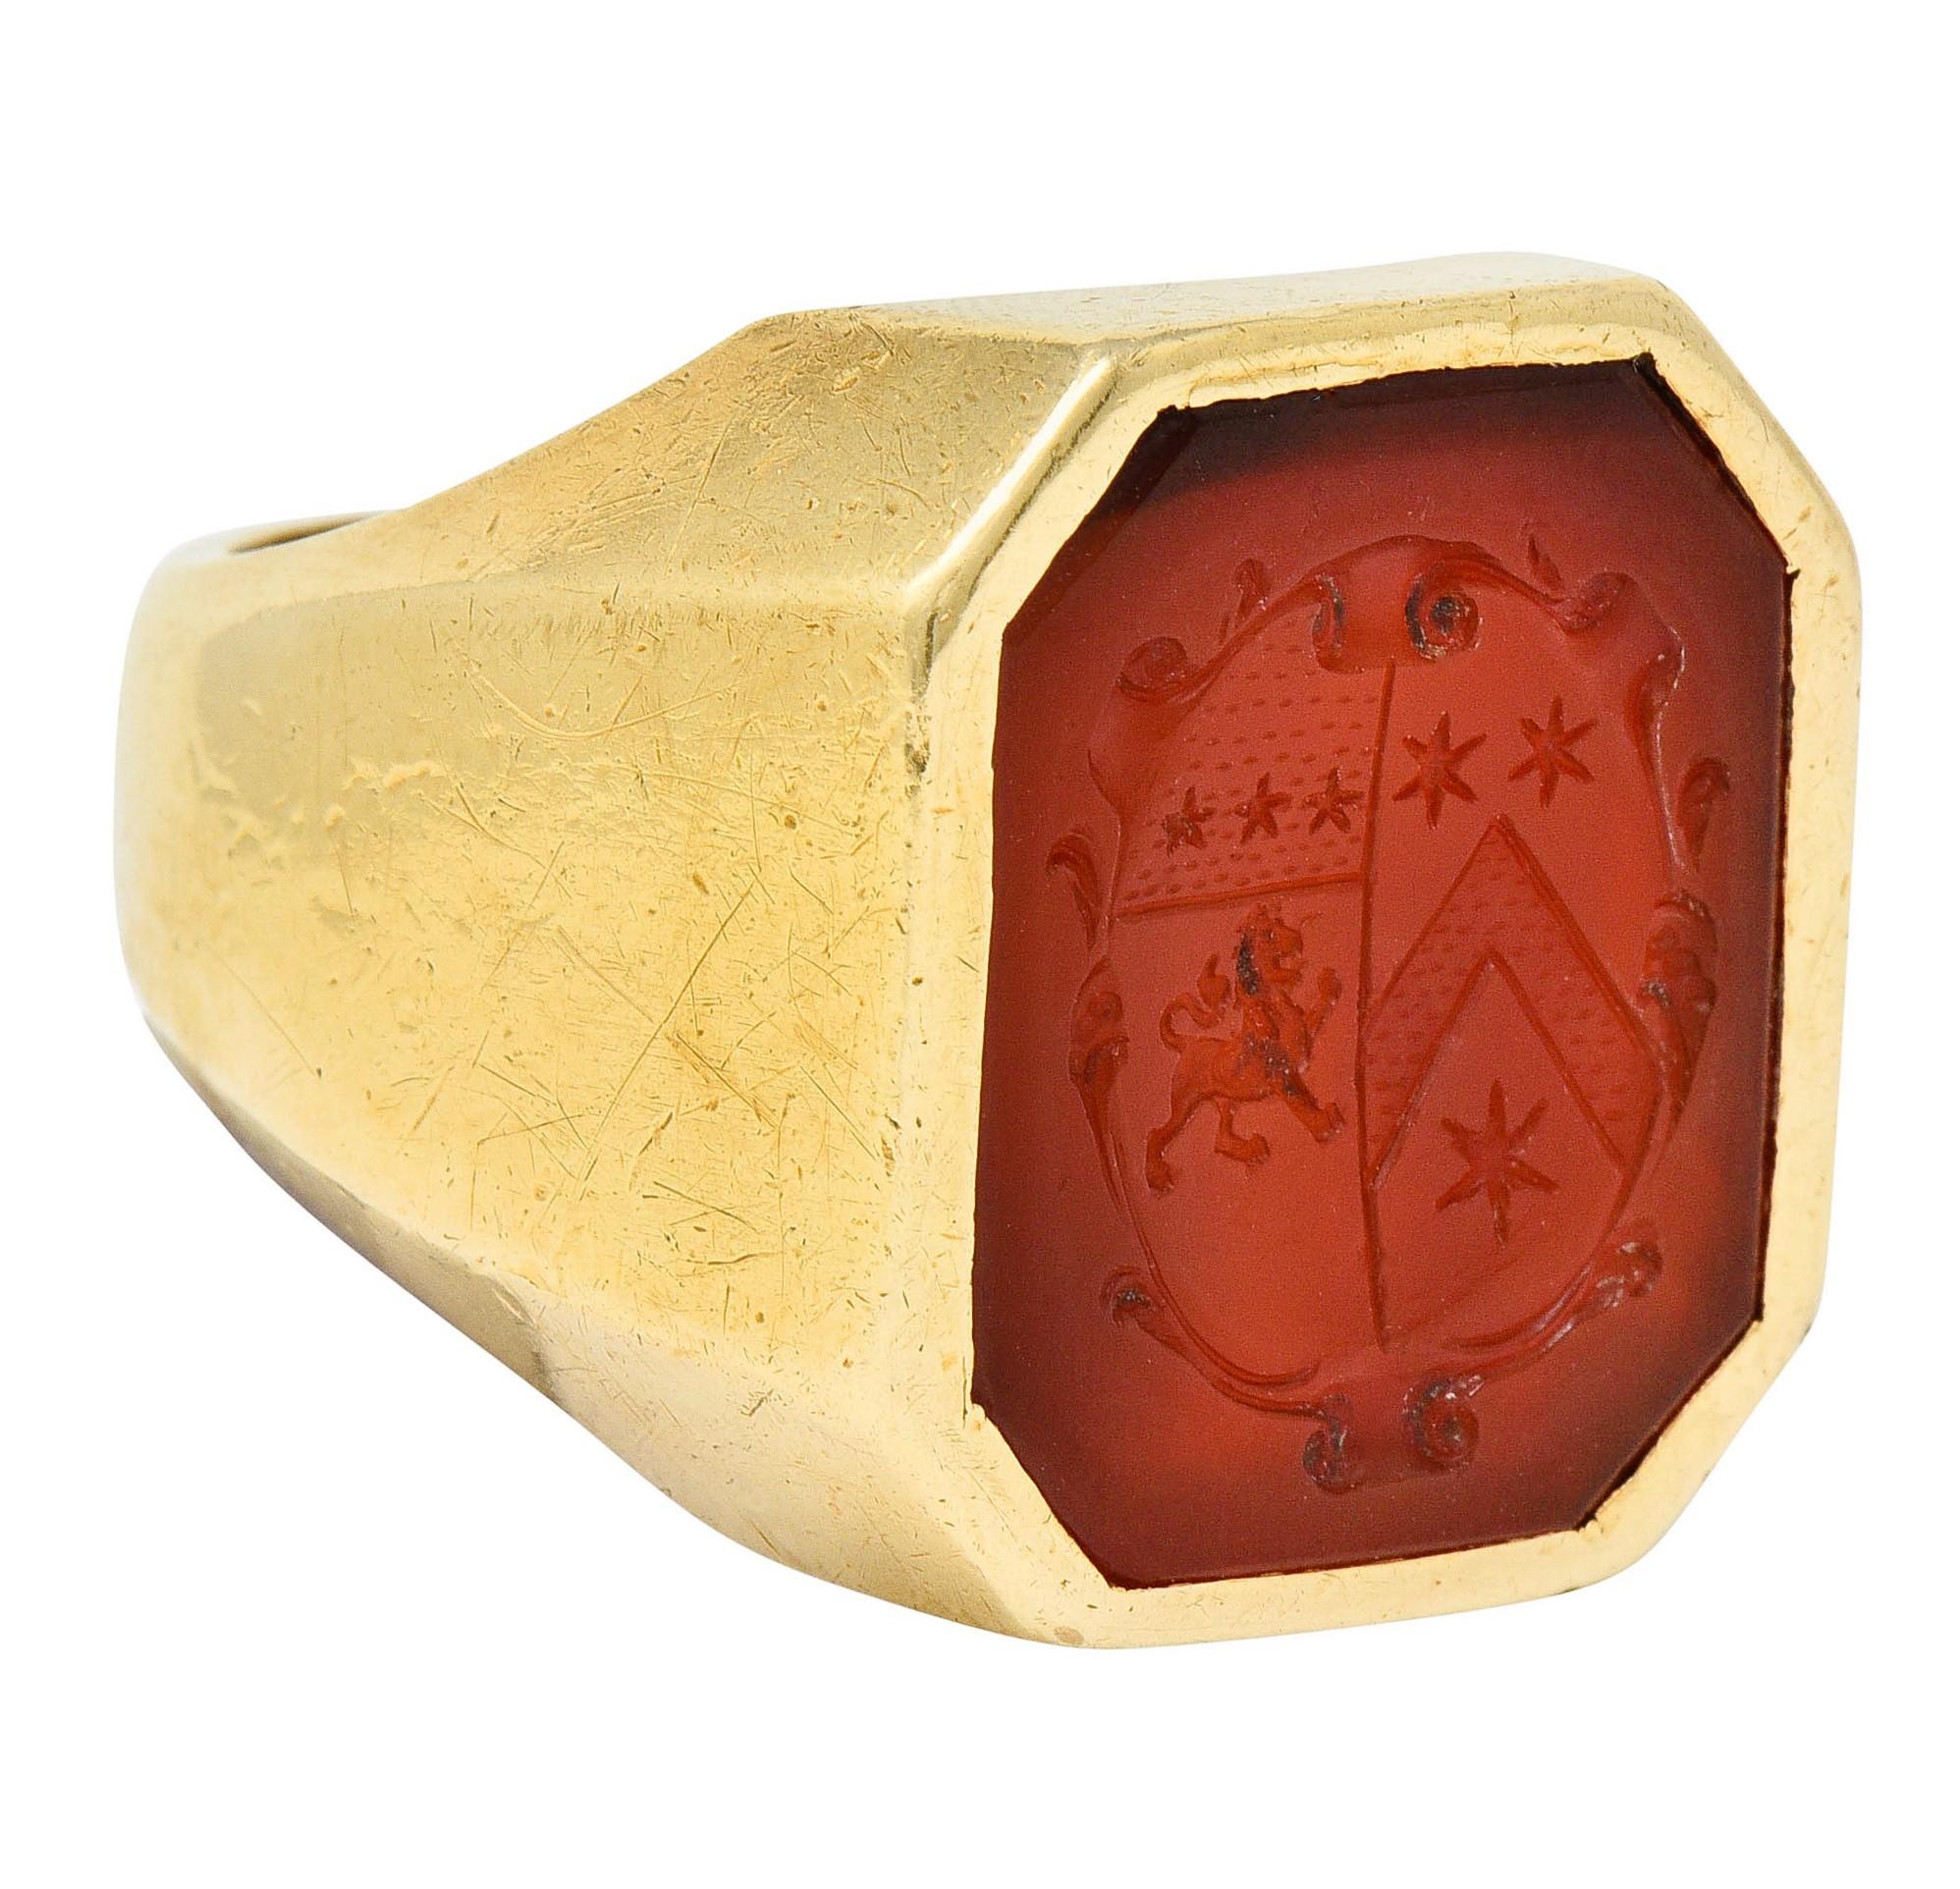 Hexagonal mounting centers a bezel set tablet of translucent orangey-red carnelian

Deeply engraved to depict a shield emblazoned with stripes, stars, and a fierce but stylized lion

Carnelian measures approximately 18.4 x 15.5 mm

Stamped 14K for